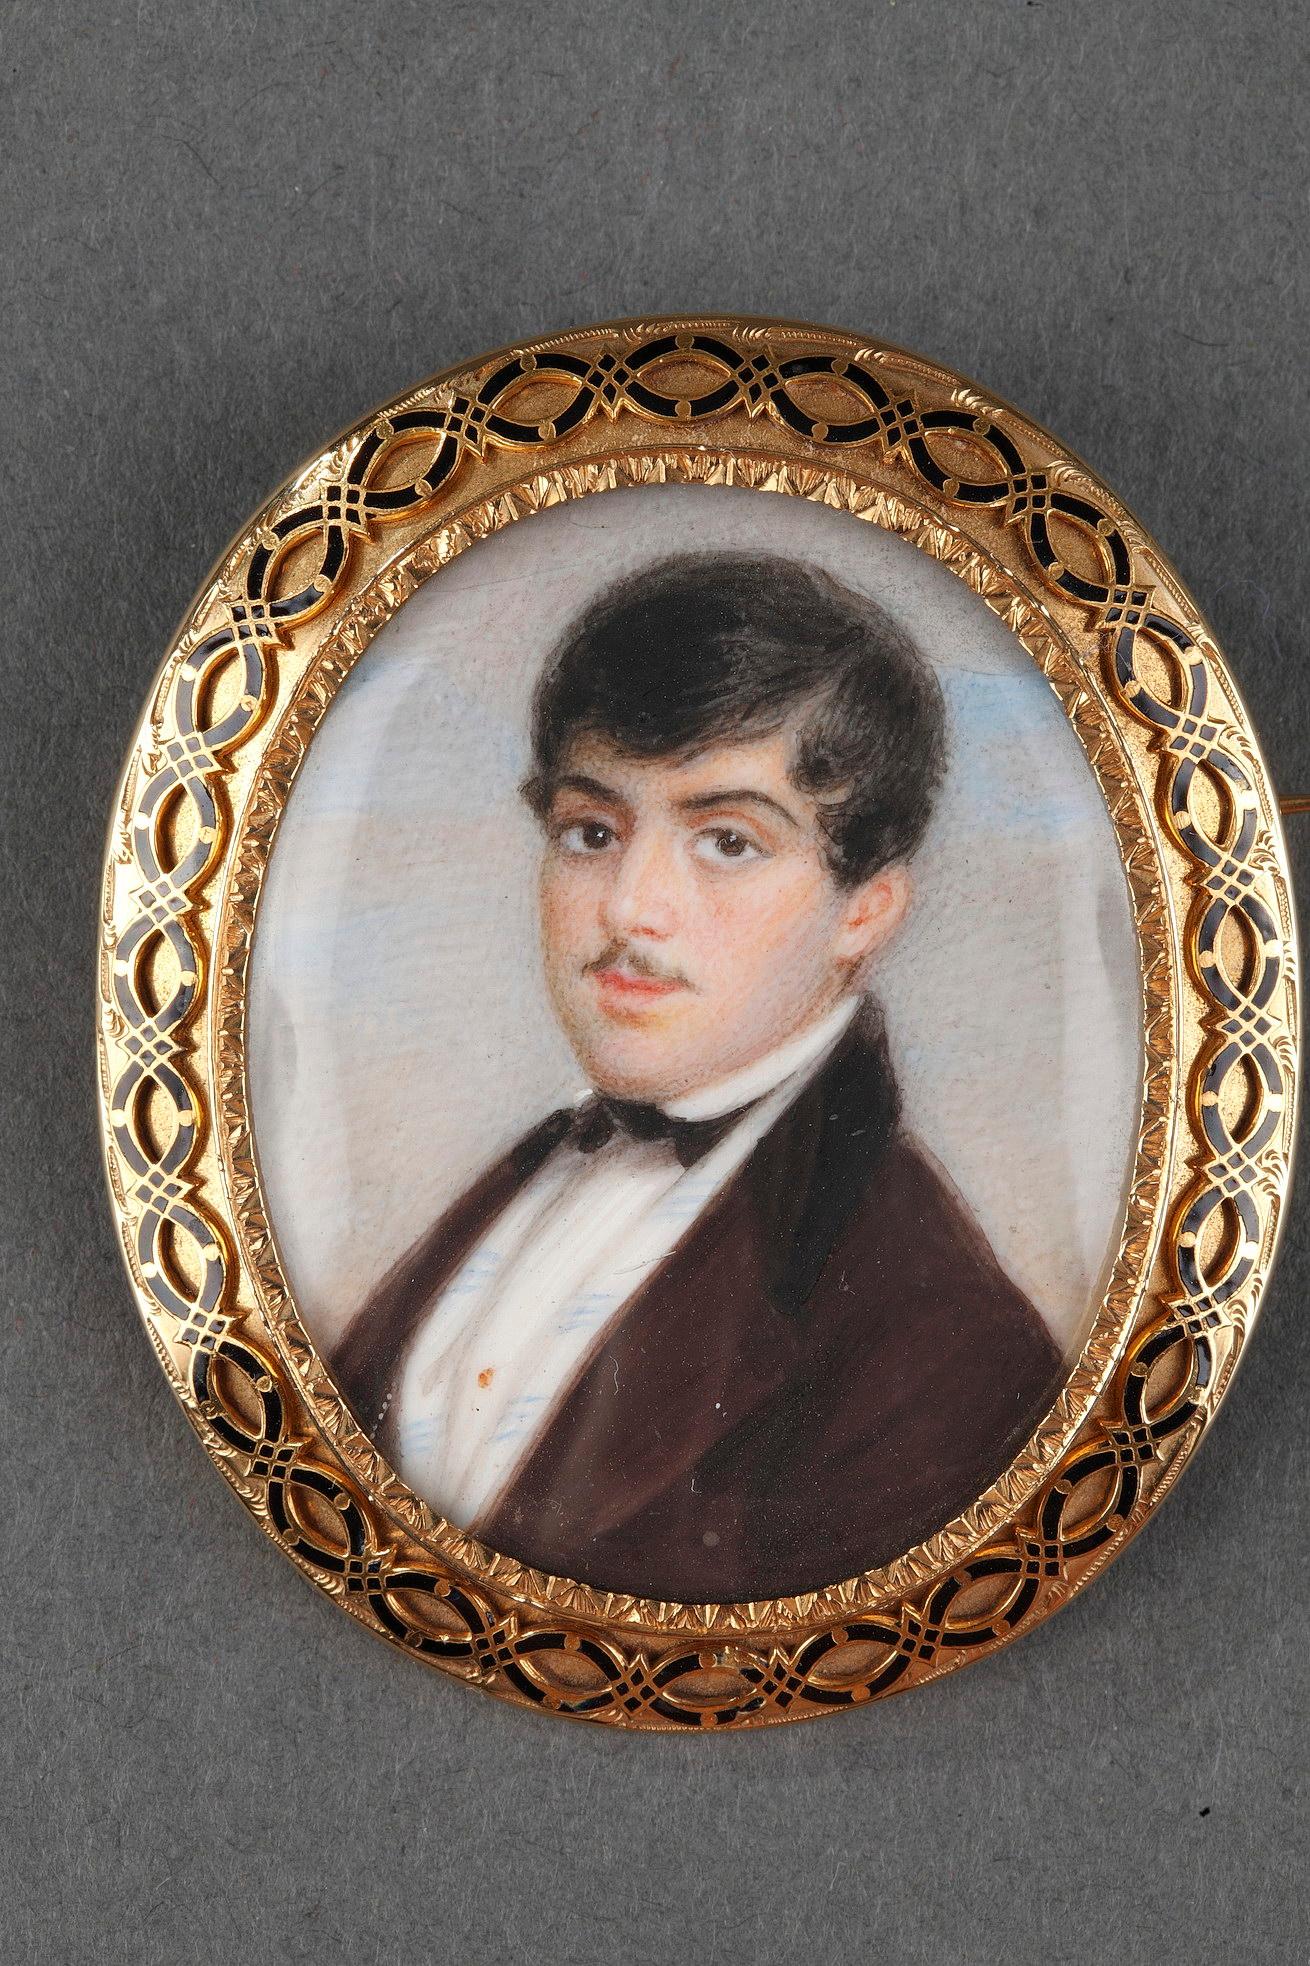 Oval  hand painted miniature mounted in gold enamelled brooch. The frame is in gold and enamelled with fine black enamel threads. The high-quality miniature shows a young man in a brown suit, black collar and bow. The jacket is open over a white